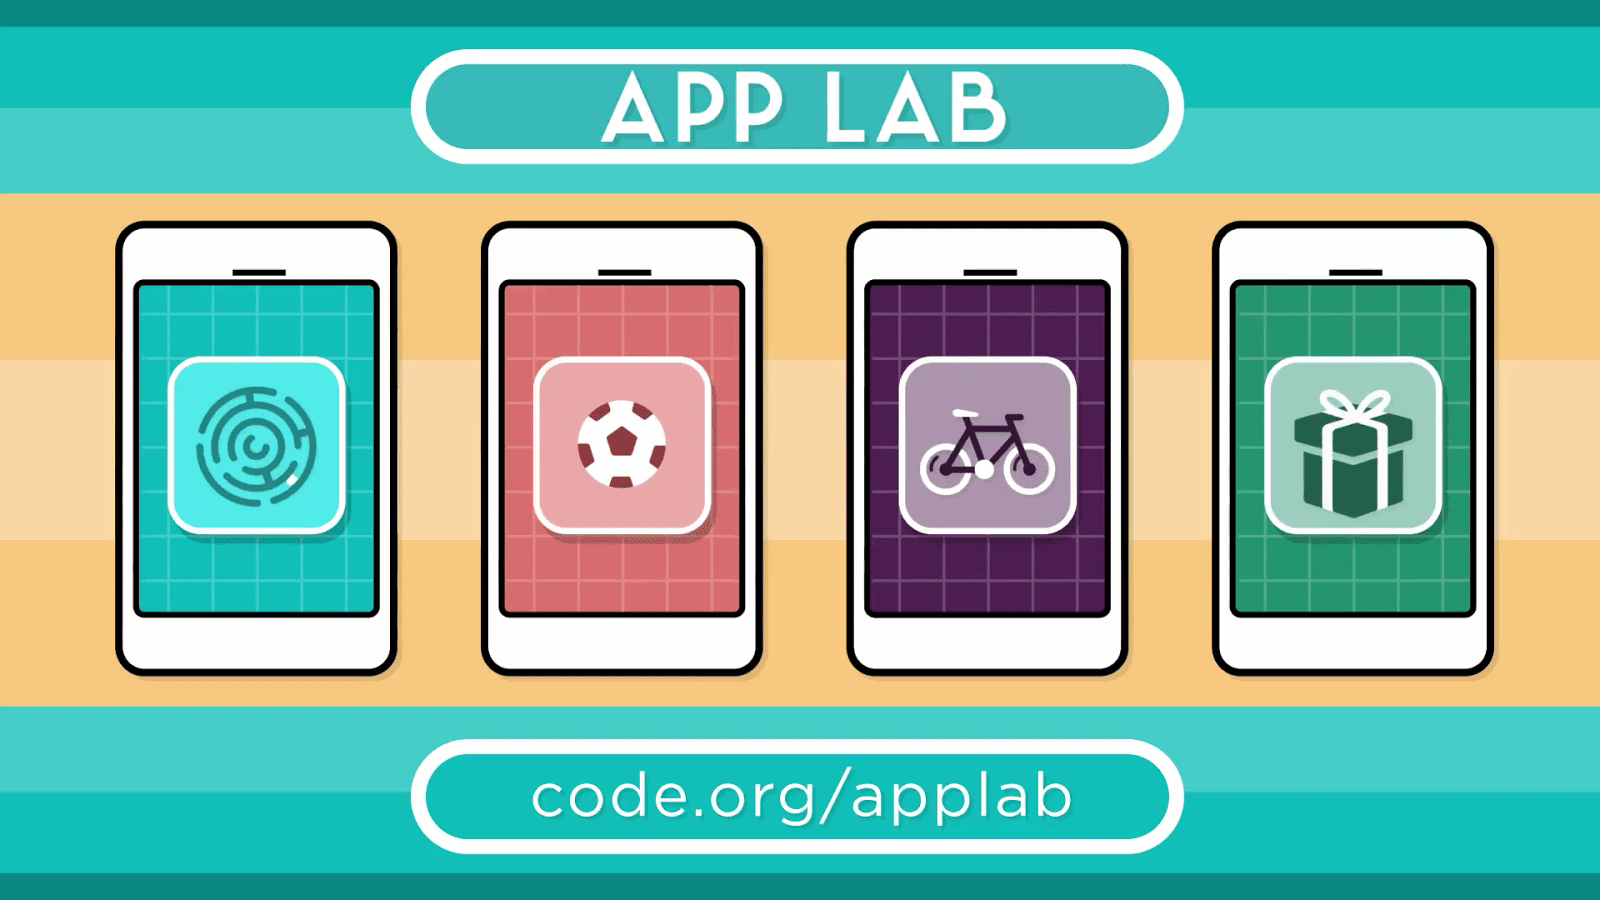 Applab Intro Welcome - Code Org App Lab , HD Wallpaper & Backgrounds